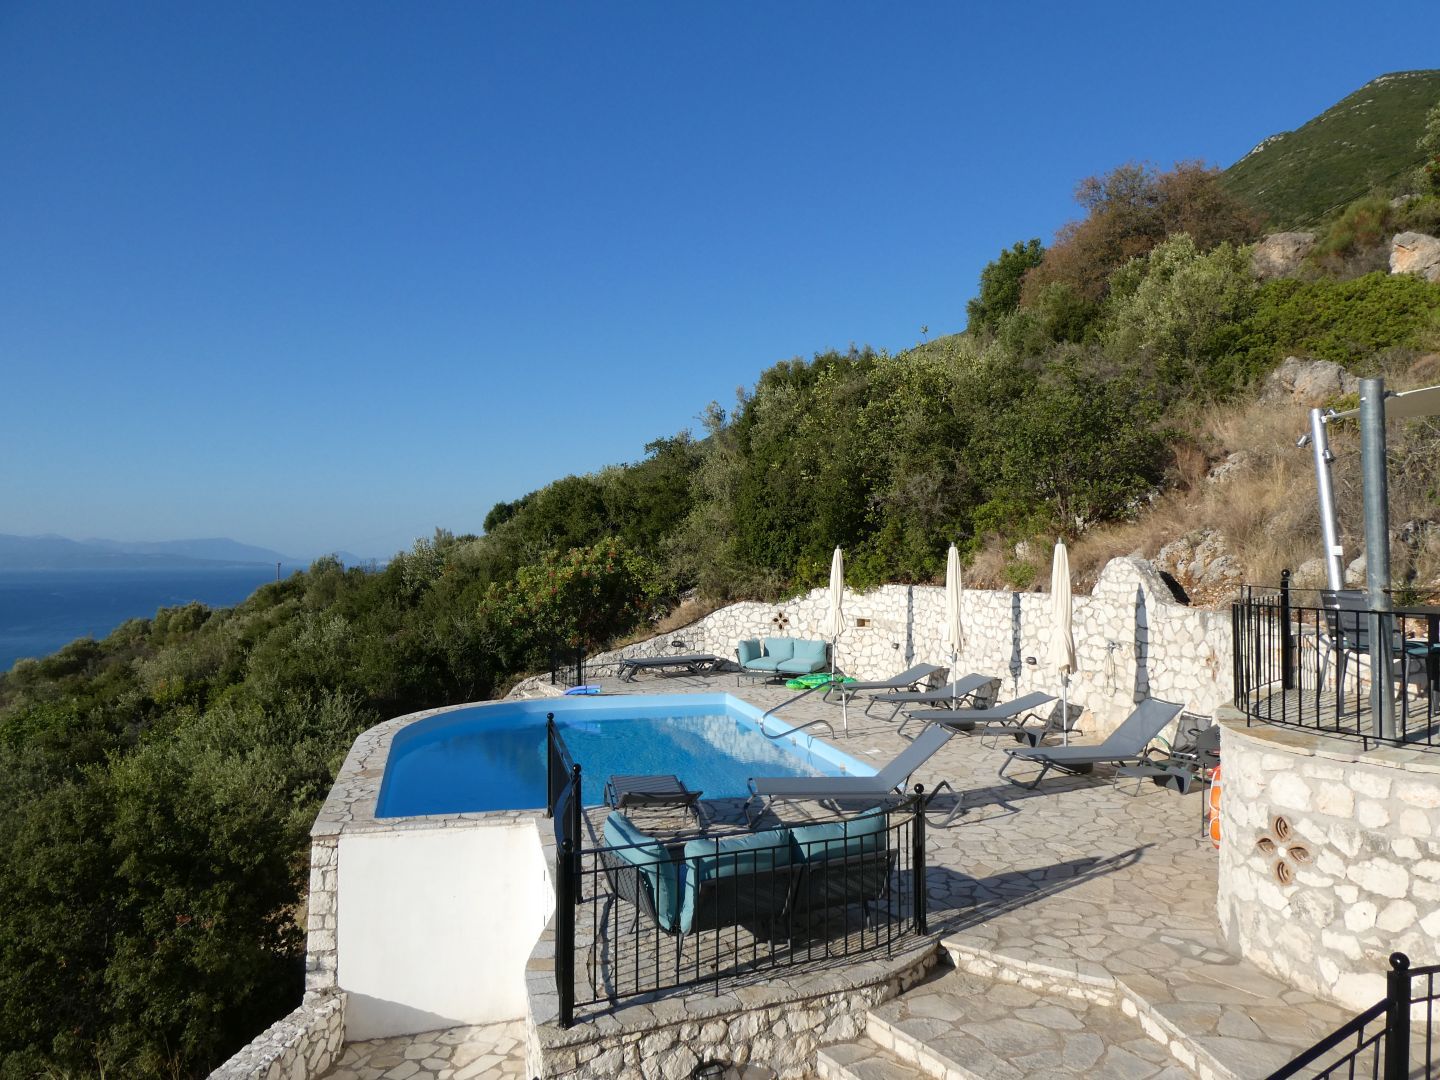 View of the pool & hillside